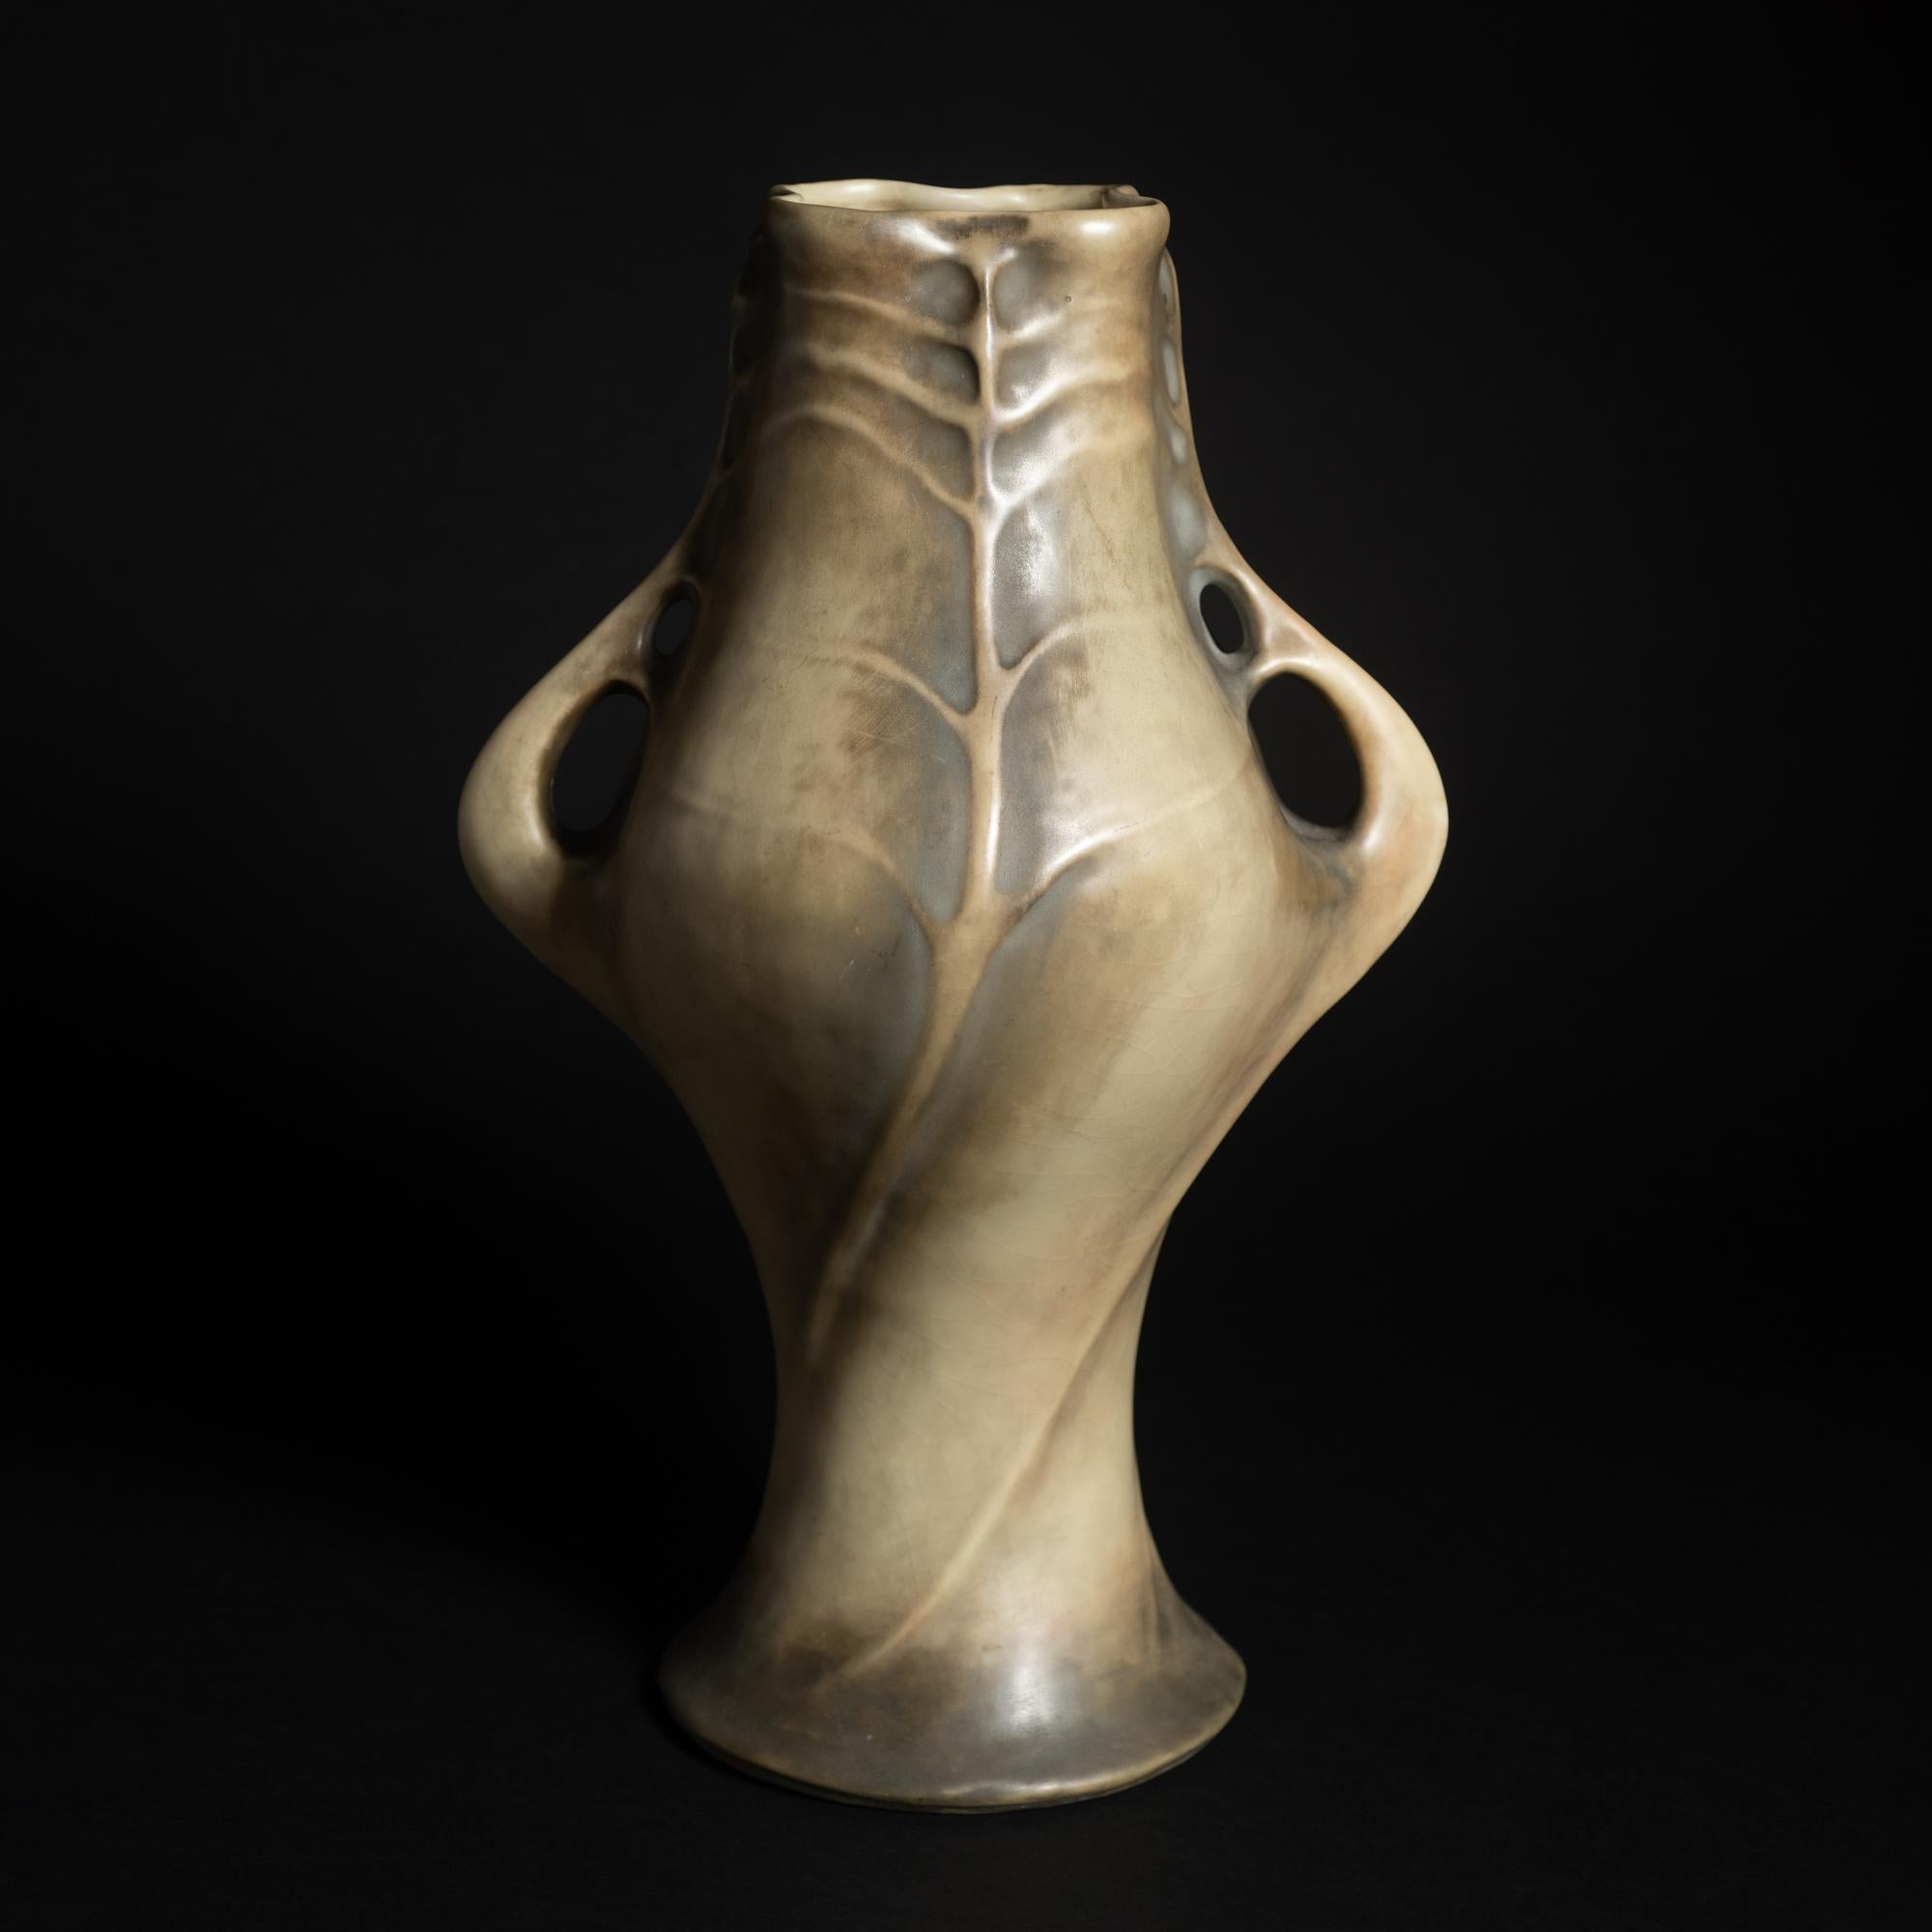 Model #3540

Paul Dachsel was the son-in-law of Alfred Stellmacher, the founder of Amphora Pottery company in Turn-Teplitz, then in Austria. Very little is known or was written about Dachsel. He served as a designer at Amphora from 1893 until 1905.